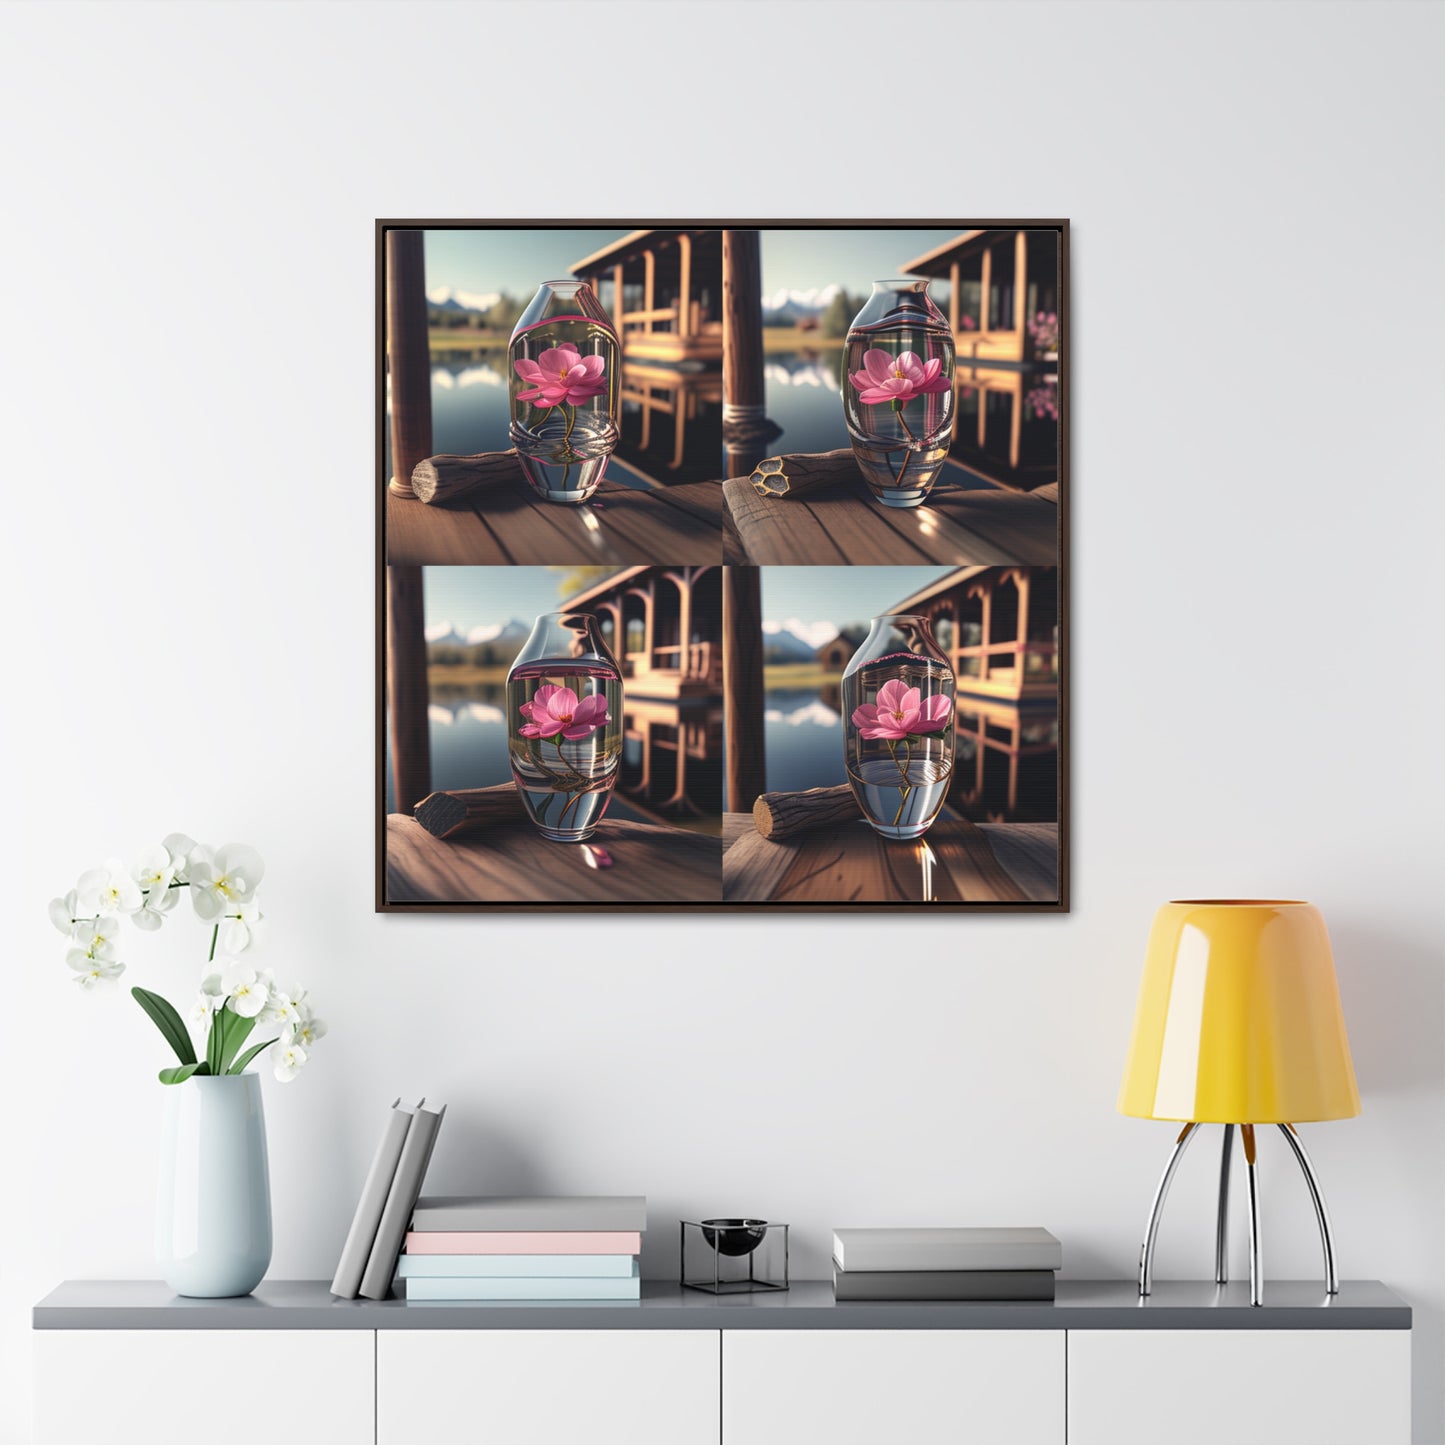 Gallery Canvas Wraps, Square Frame Pink Magnolia 5